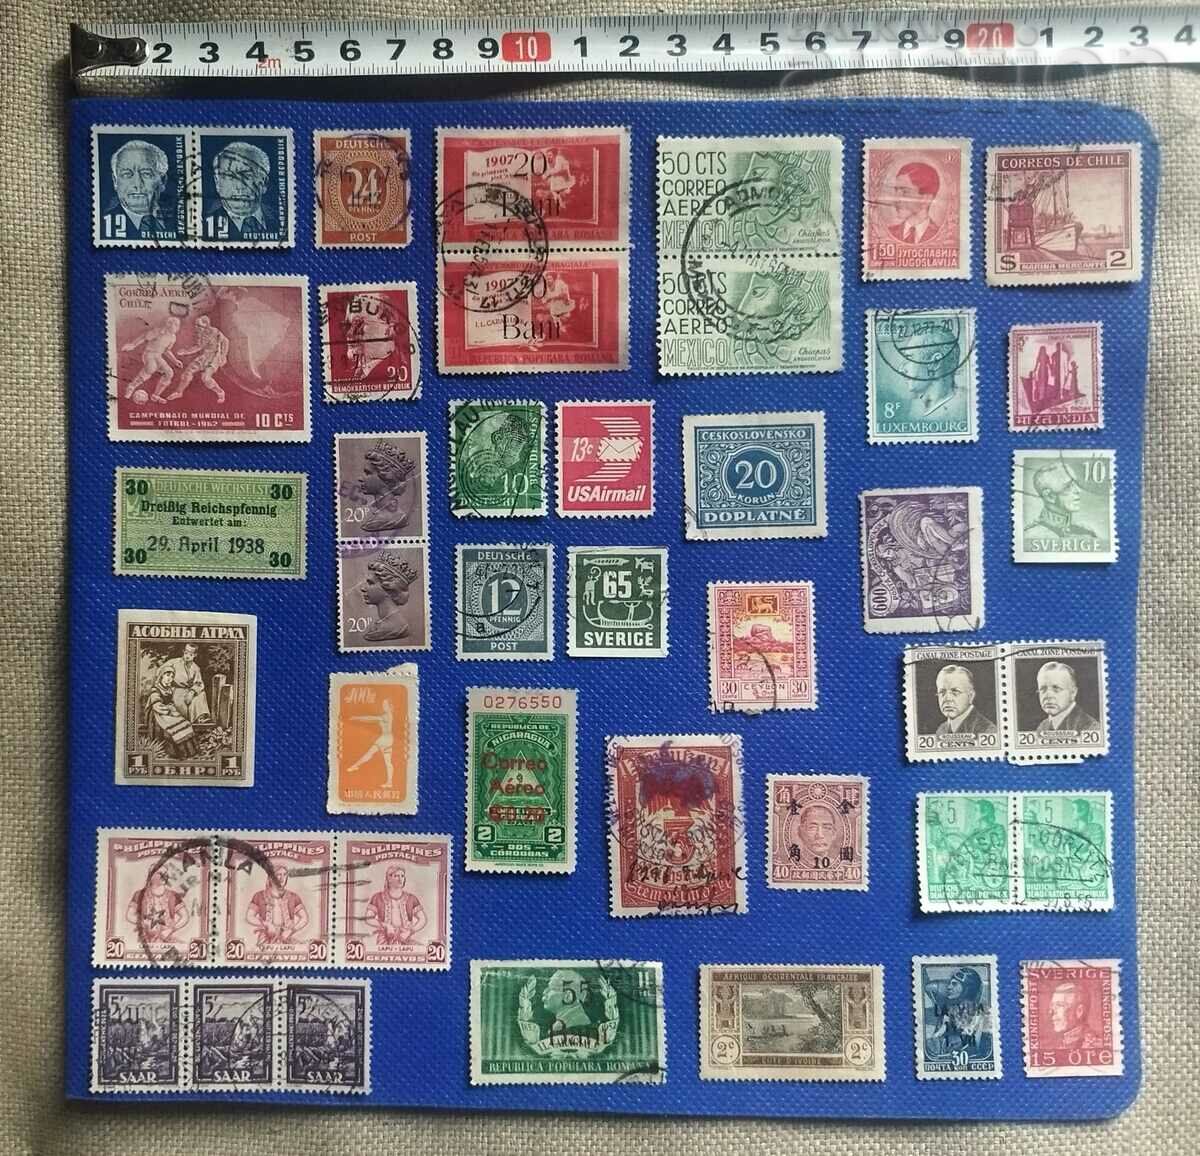 Lot of postage stamps (15)